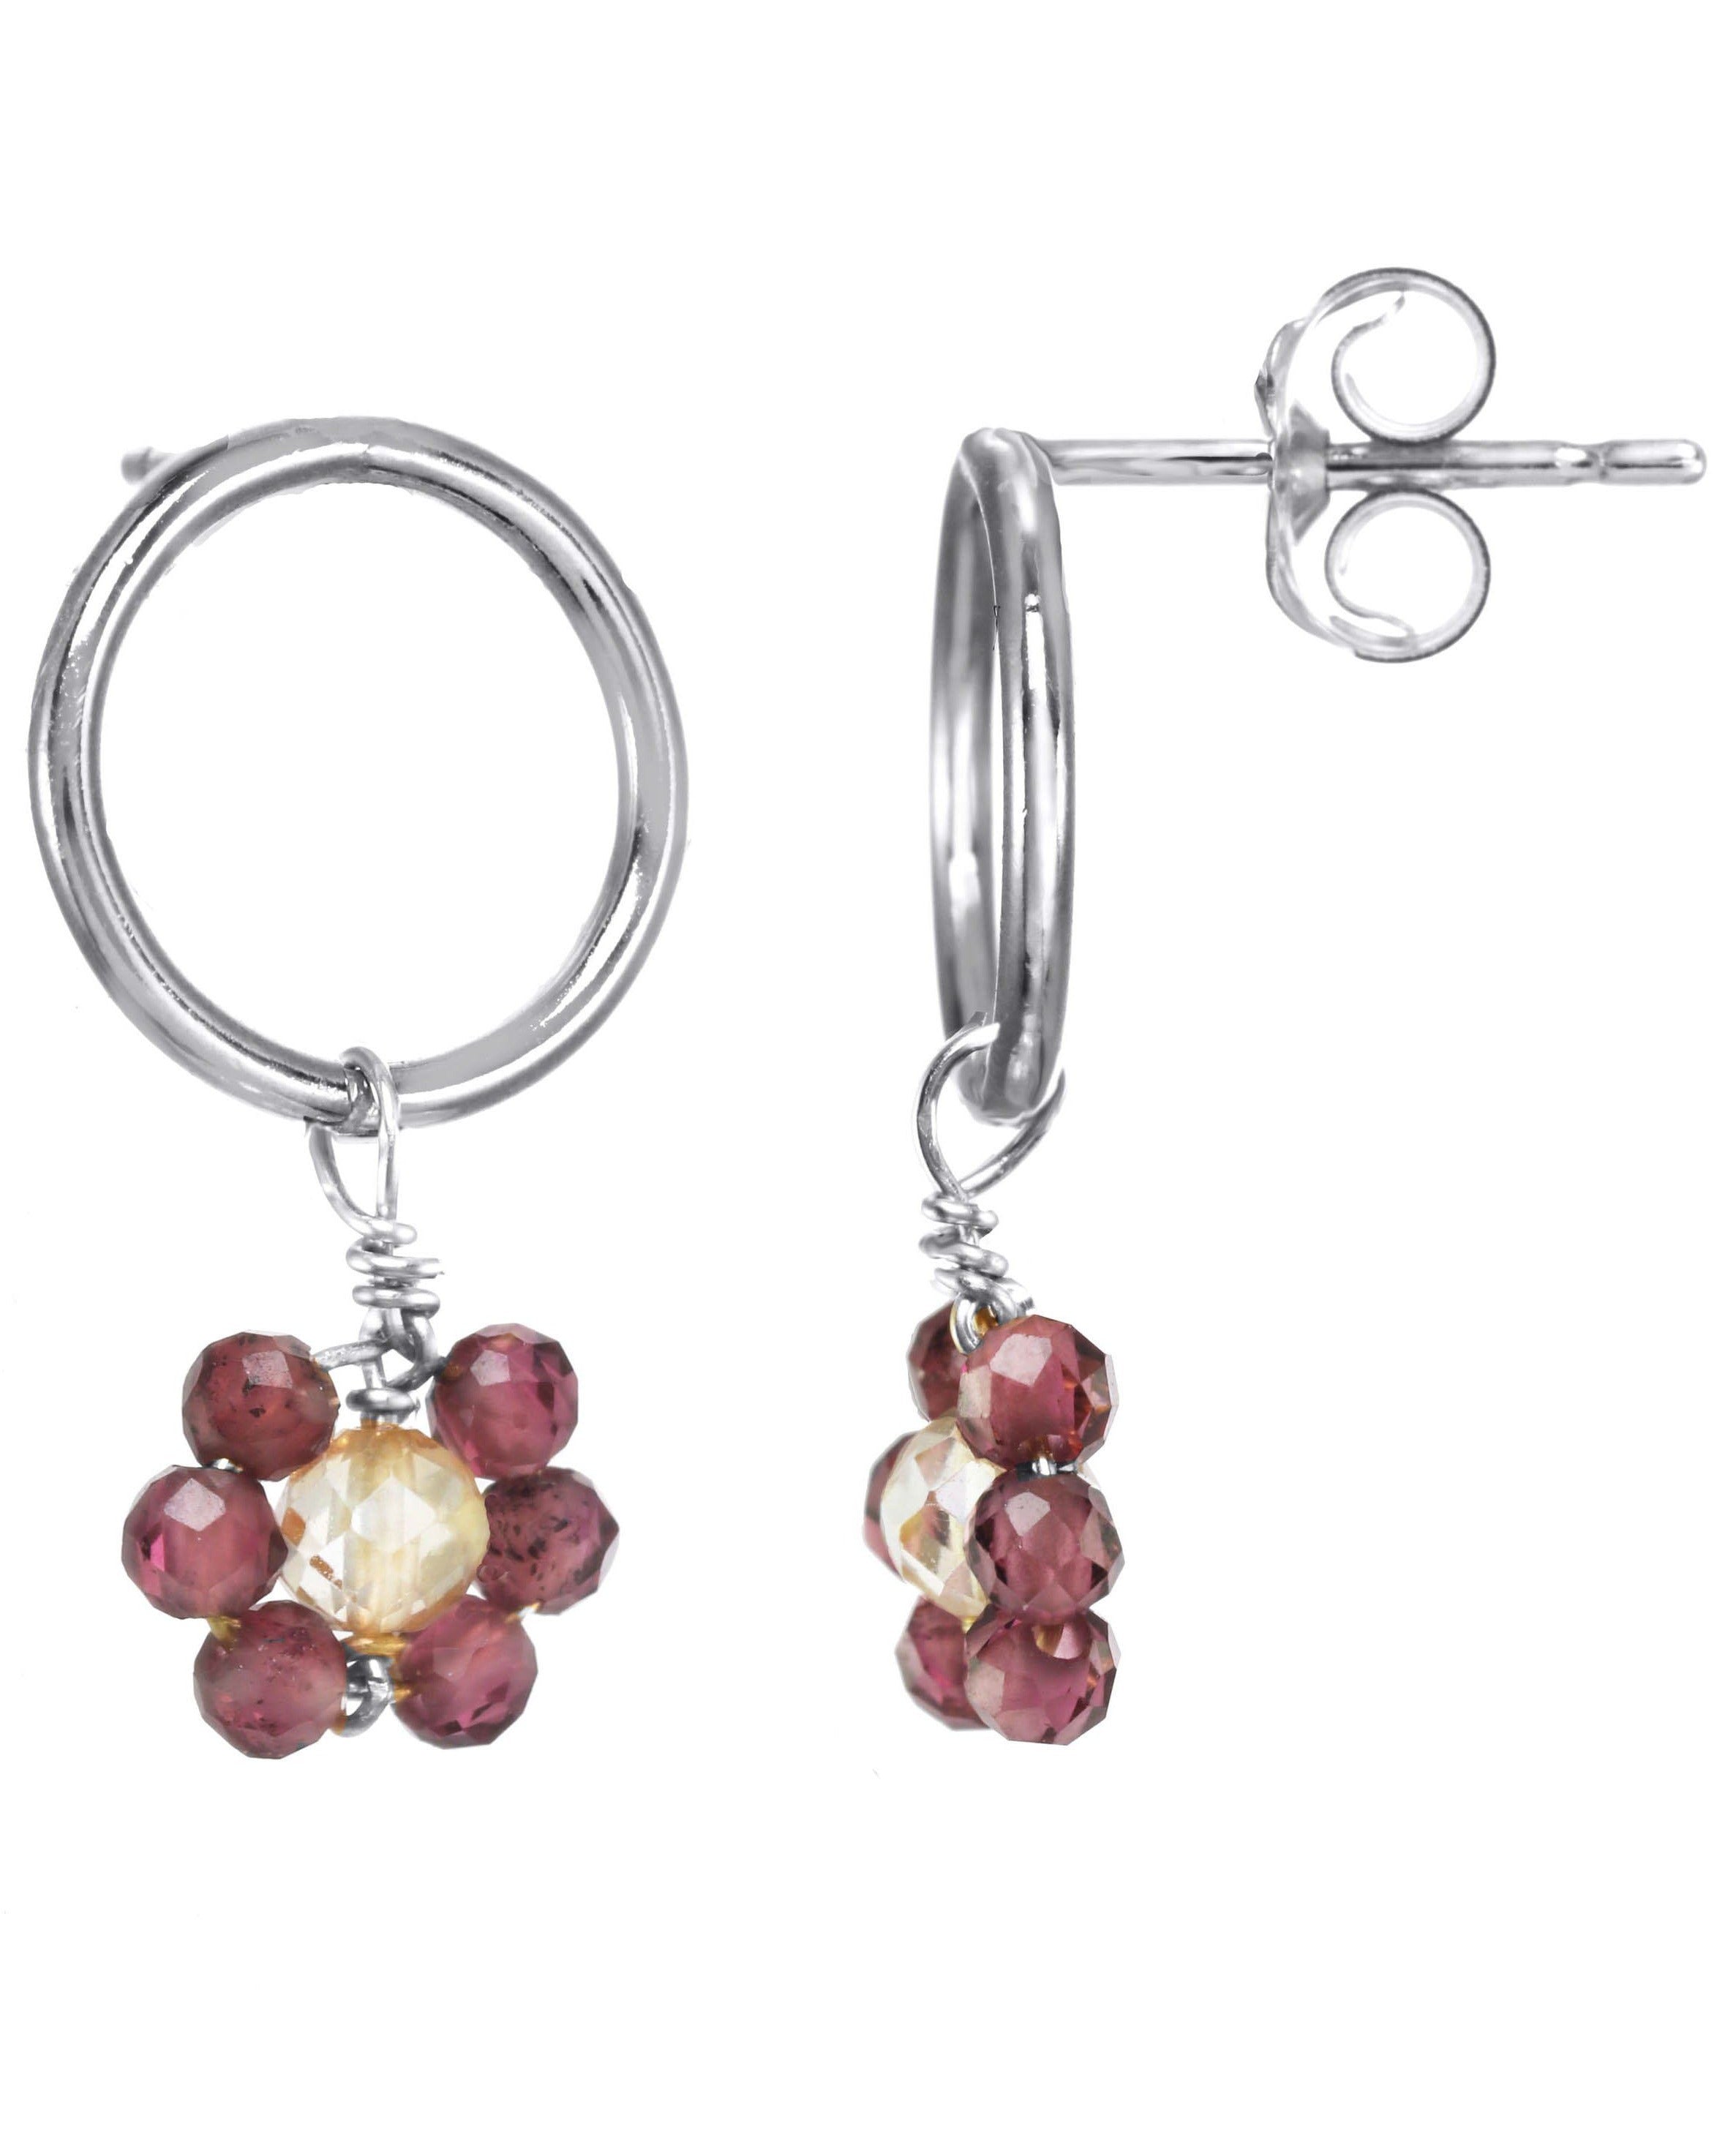 Florcitas Earrings by KOZAKH. 10mm circle studs, crafted in Sterling Silver, featuring 2mm Garnet gems and 3mm Imperial Topaz forming a daisy.